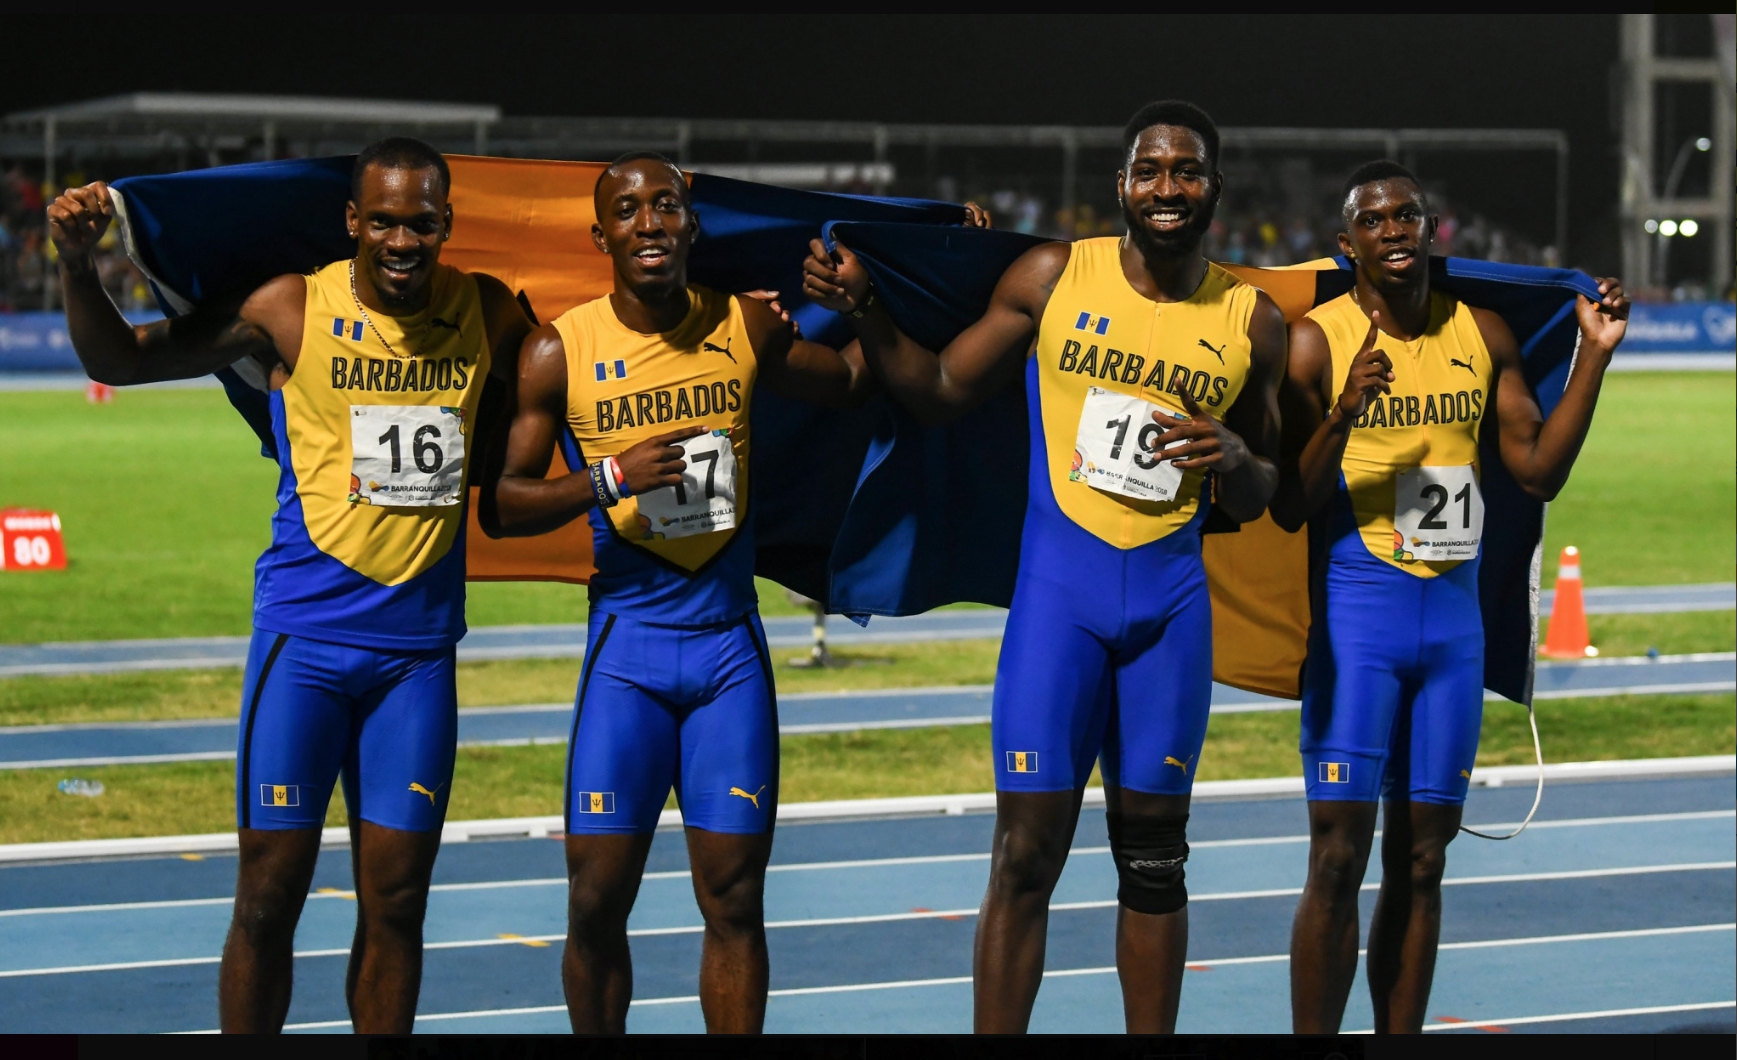 Barbados produce NR to win CAC Games 4×1 title